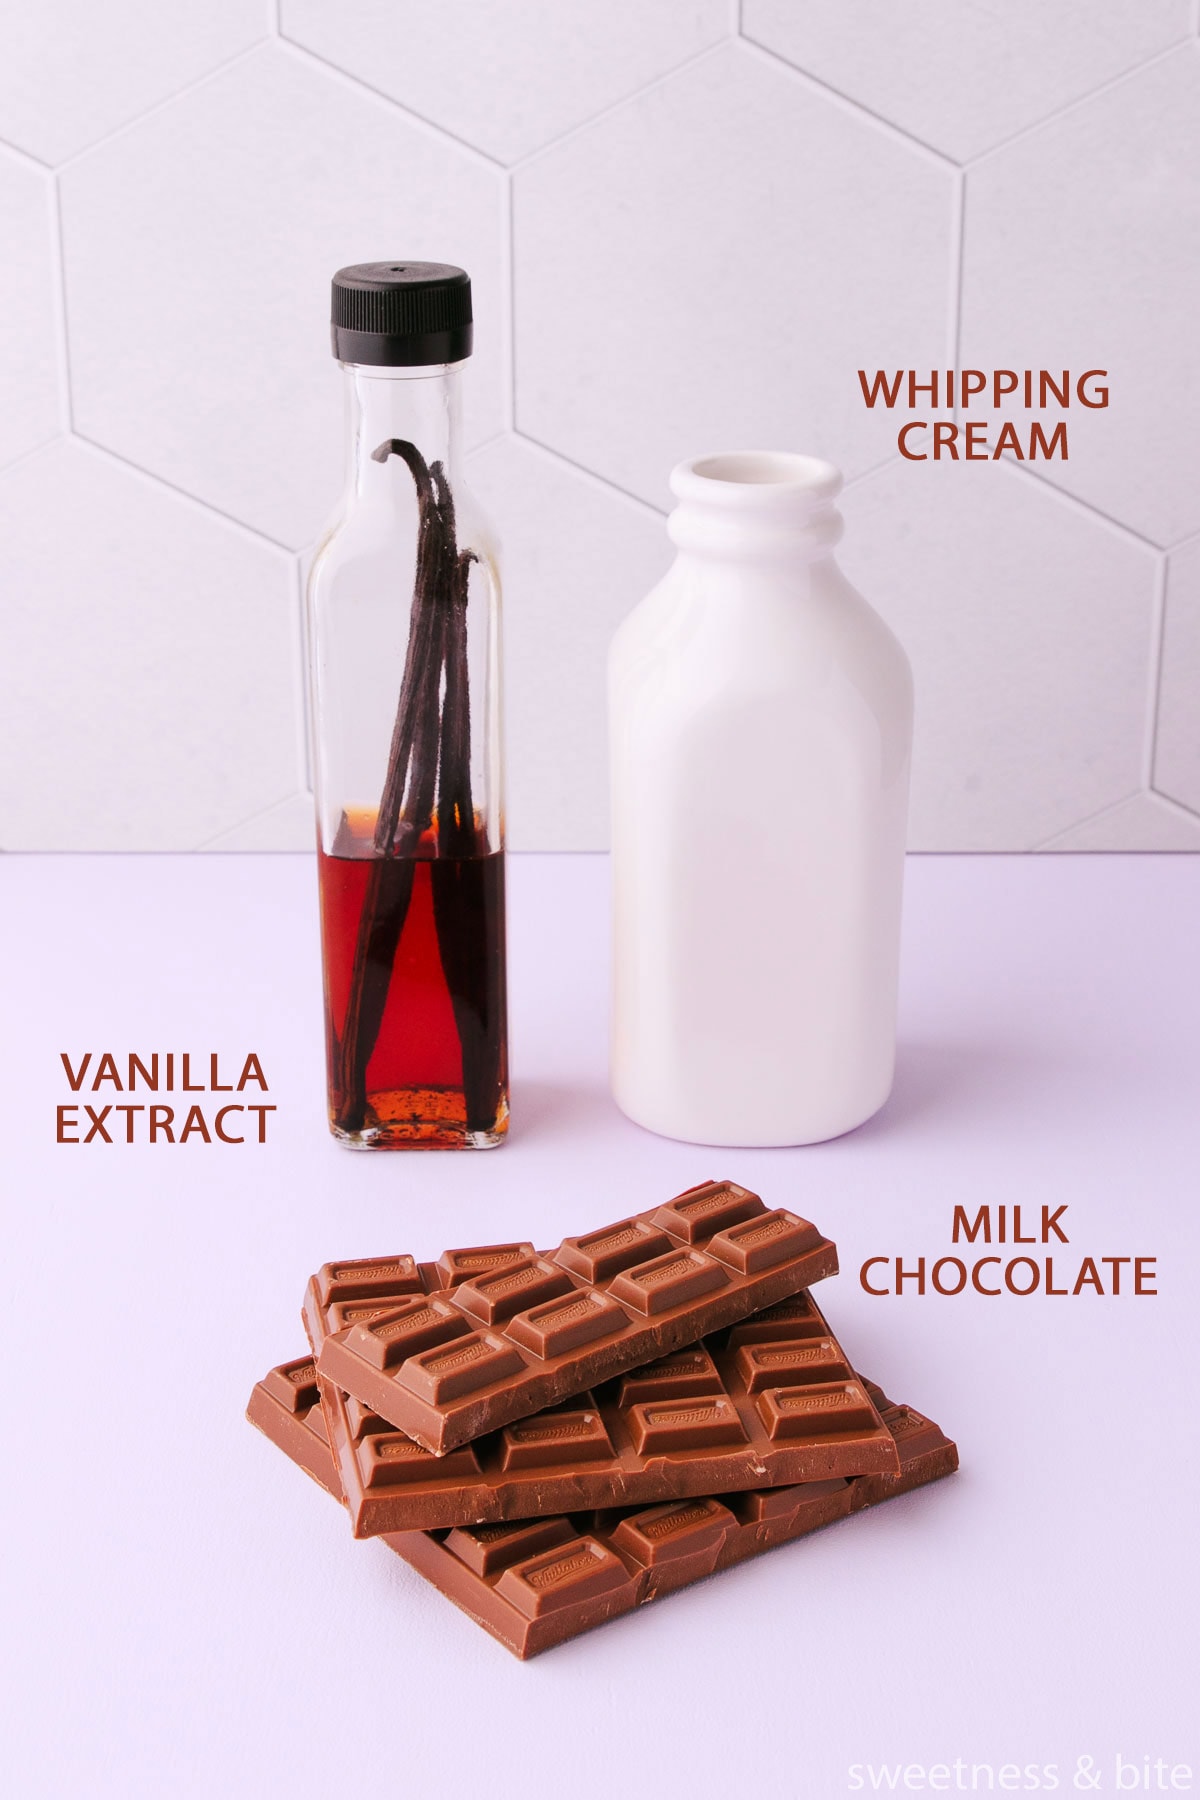 The labelled milk chocolate mousse ingredients - whipping cream, milk chocolate and vanilla extract.